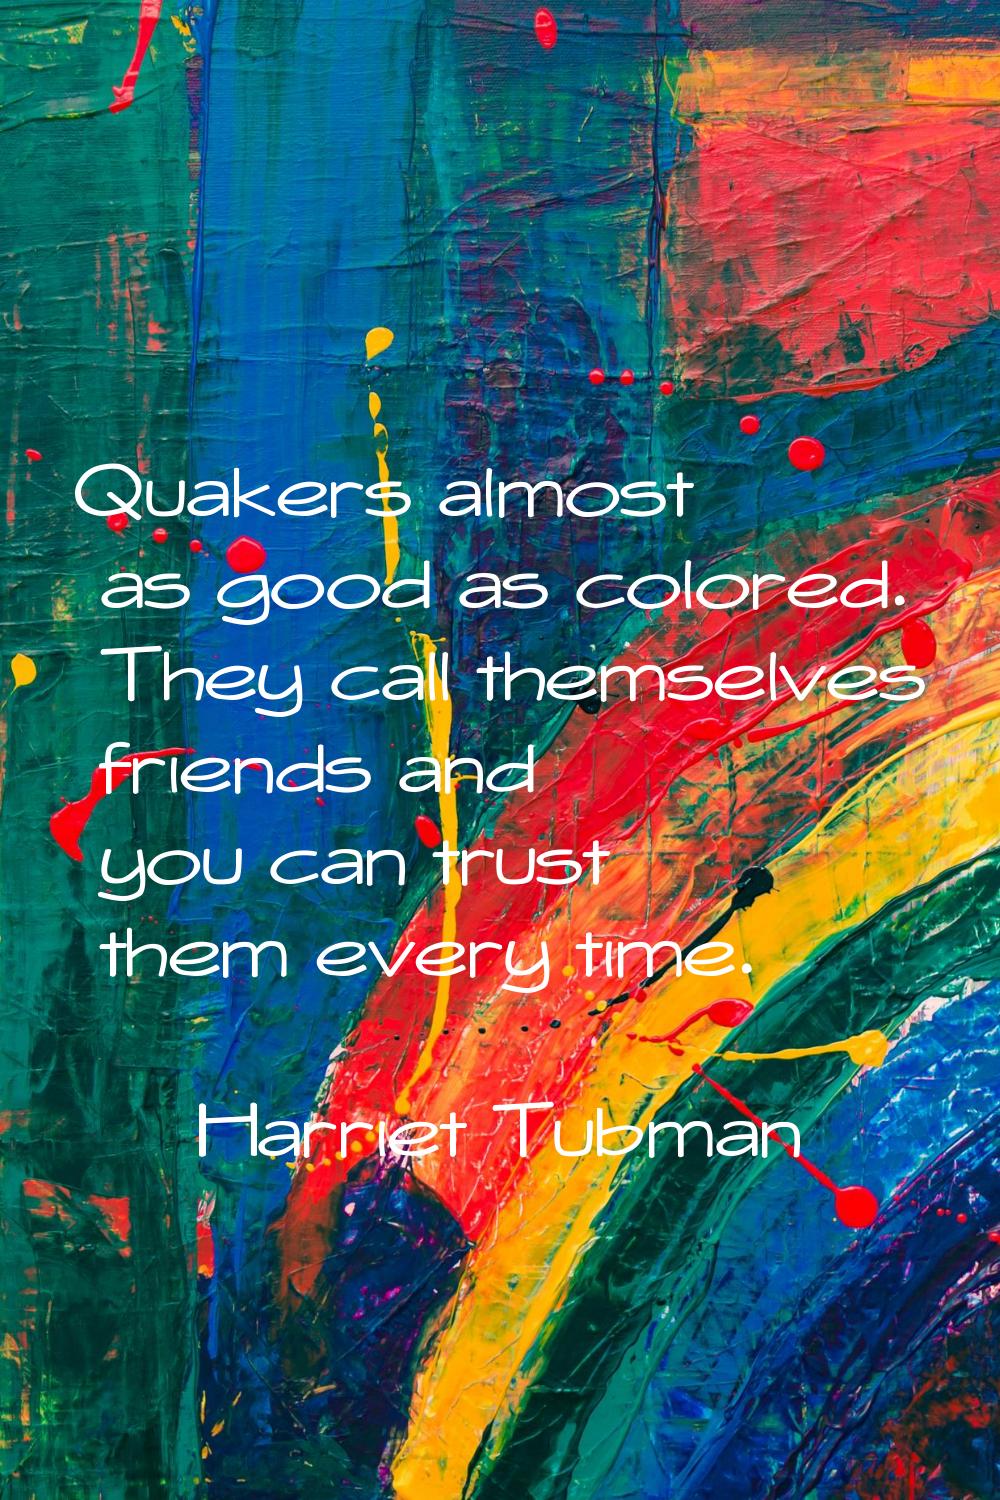 Quakers almost as good as colored. They call themselves friends and you can trust them every time.